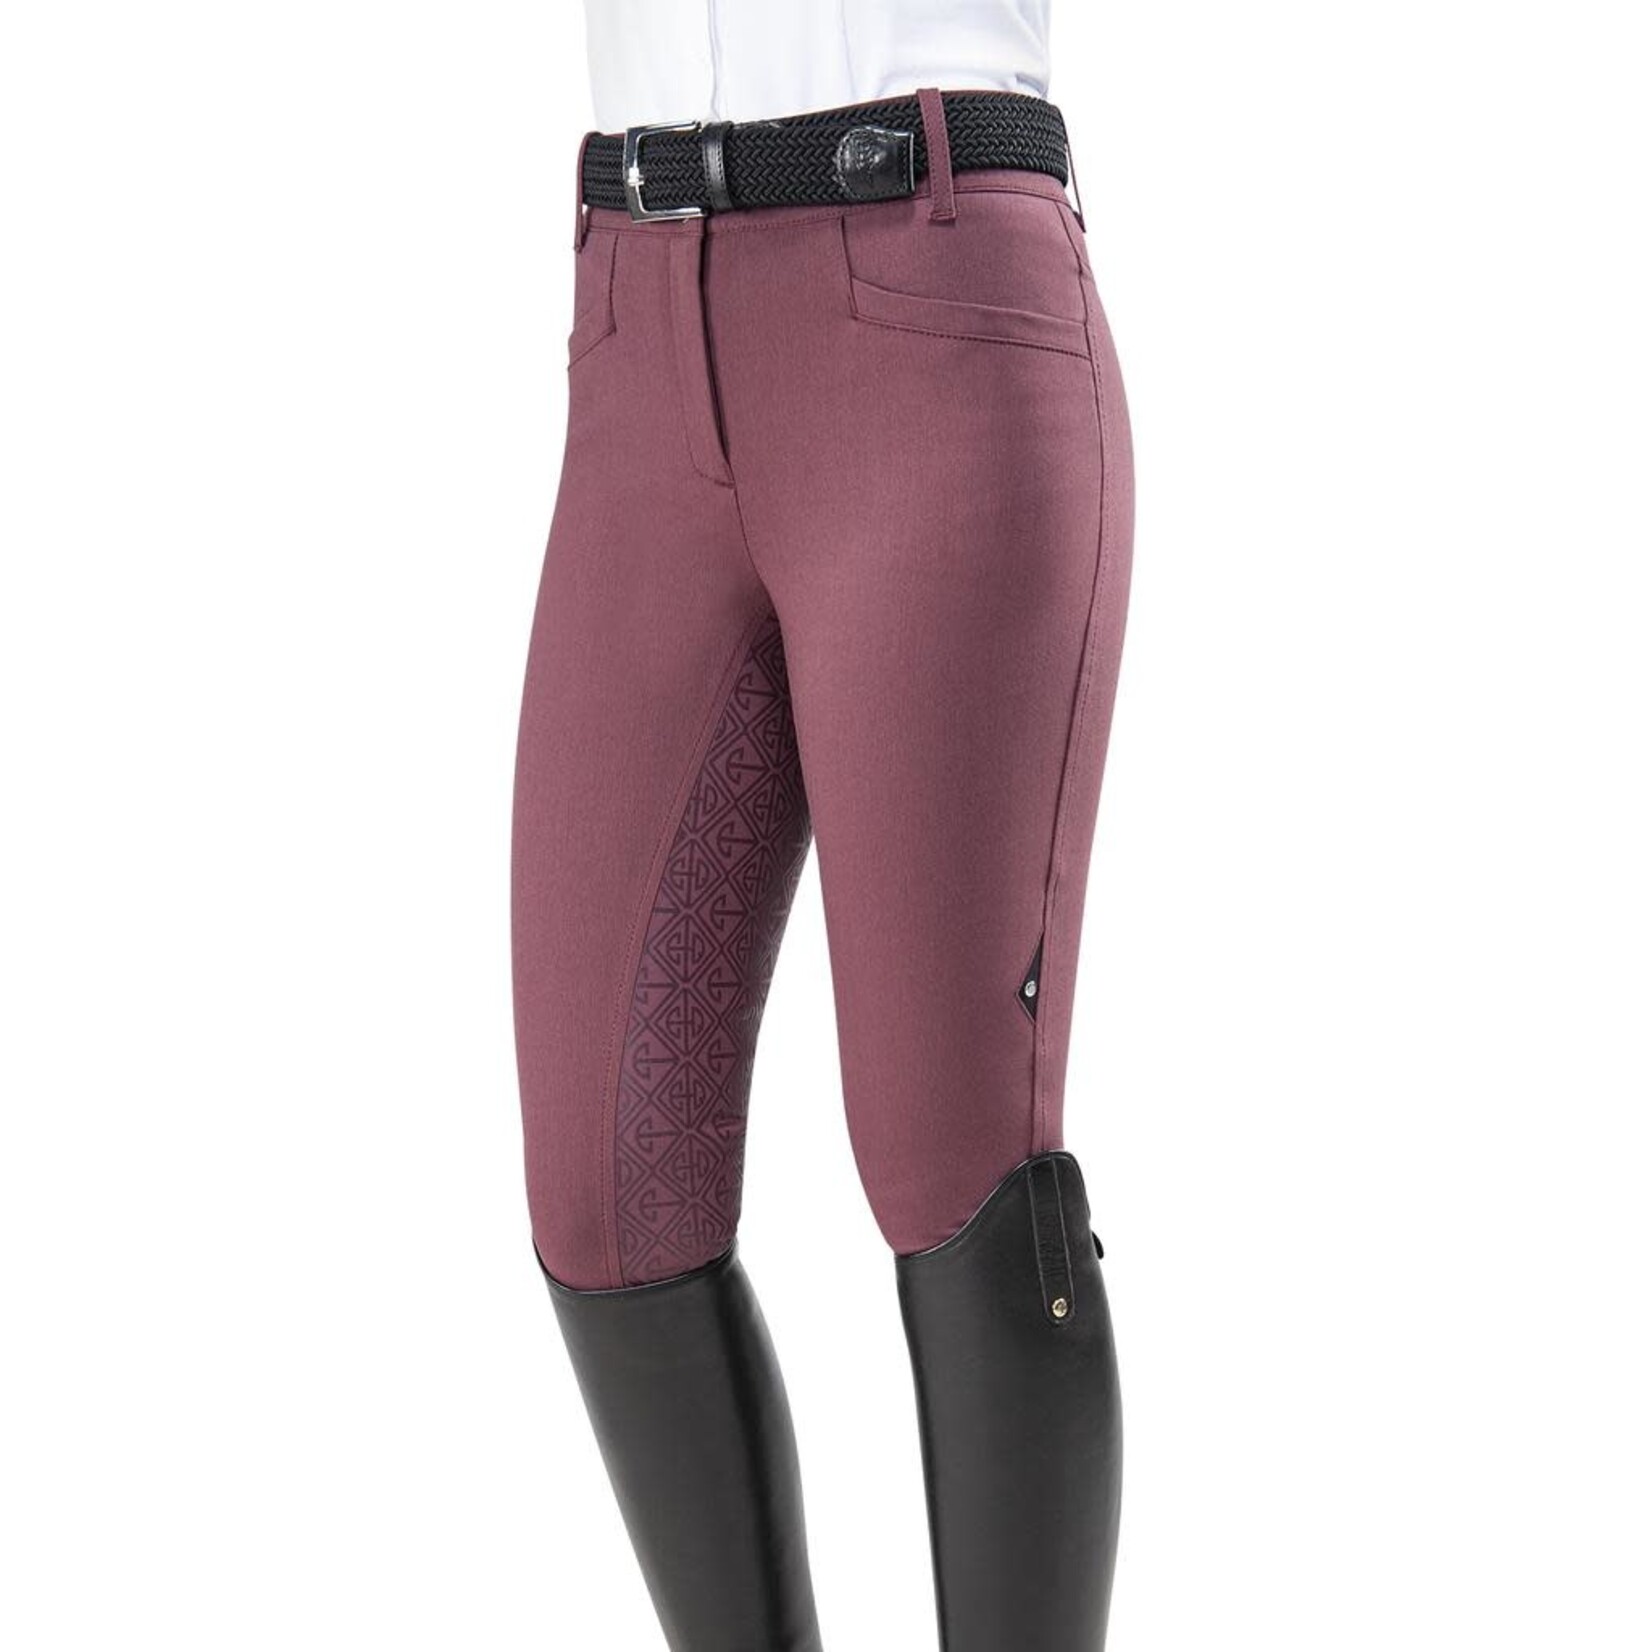 Equiline Equiline Women's Esil Breeches